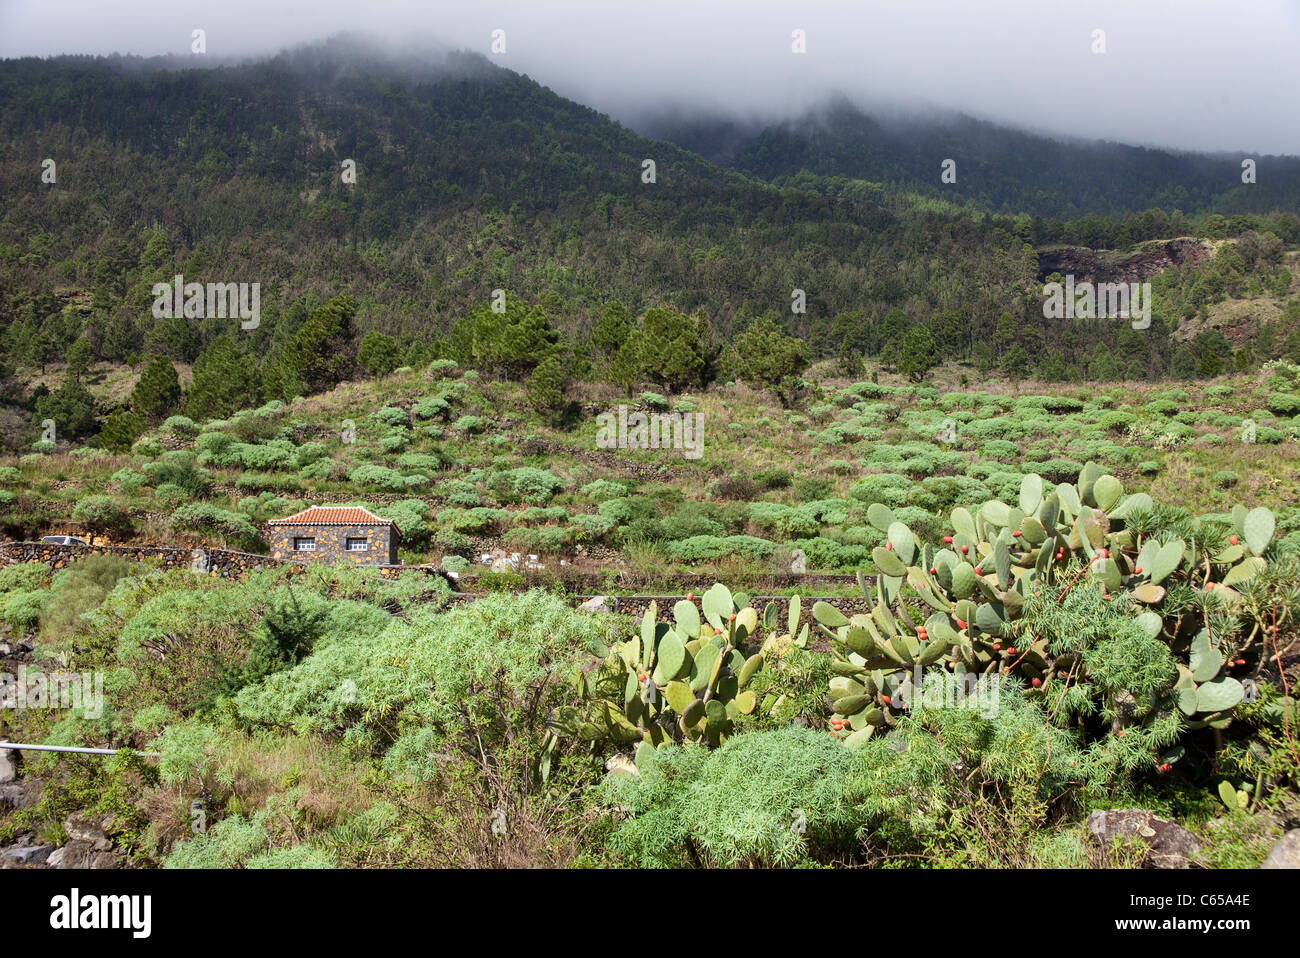 Landscape at south of the island with Prickly pears (Opuntia ficus-indica), Fuencaliente, Los Canarios, La Palma, Canary islands, Spain, Europe Stock Photo